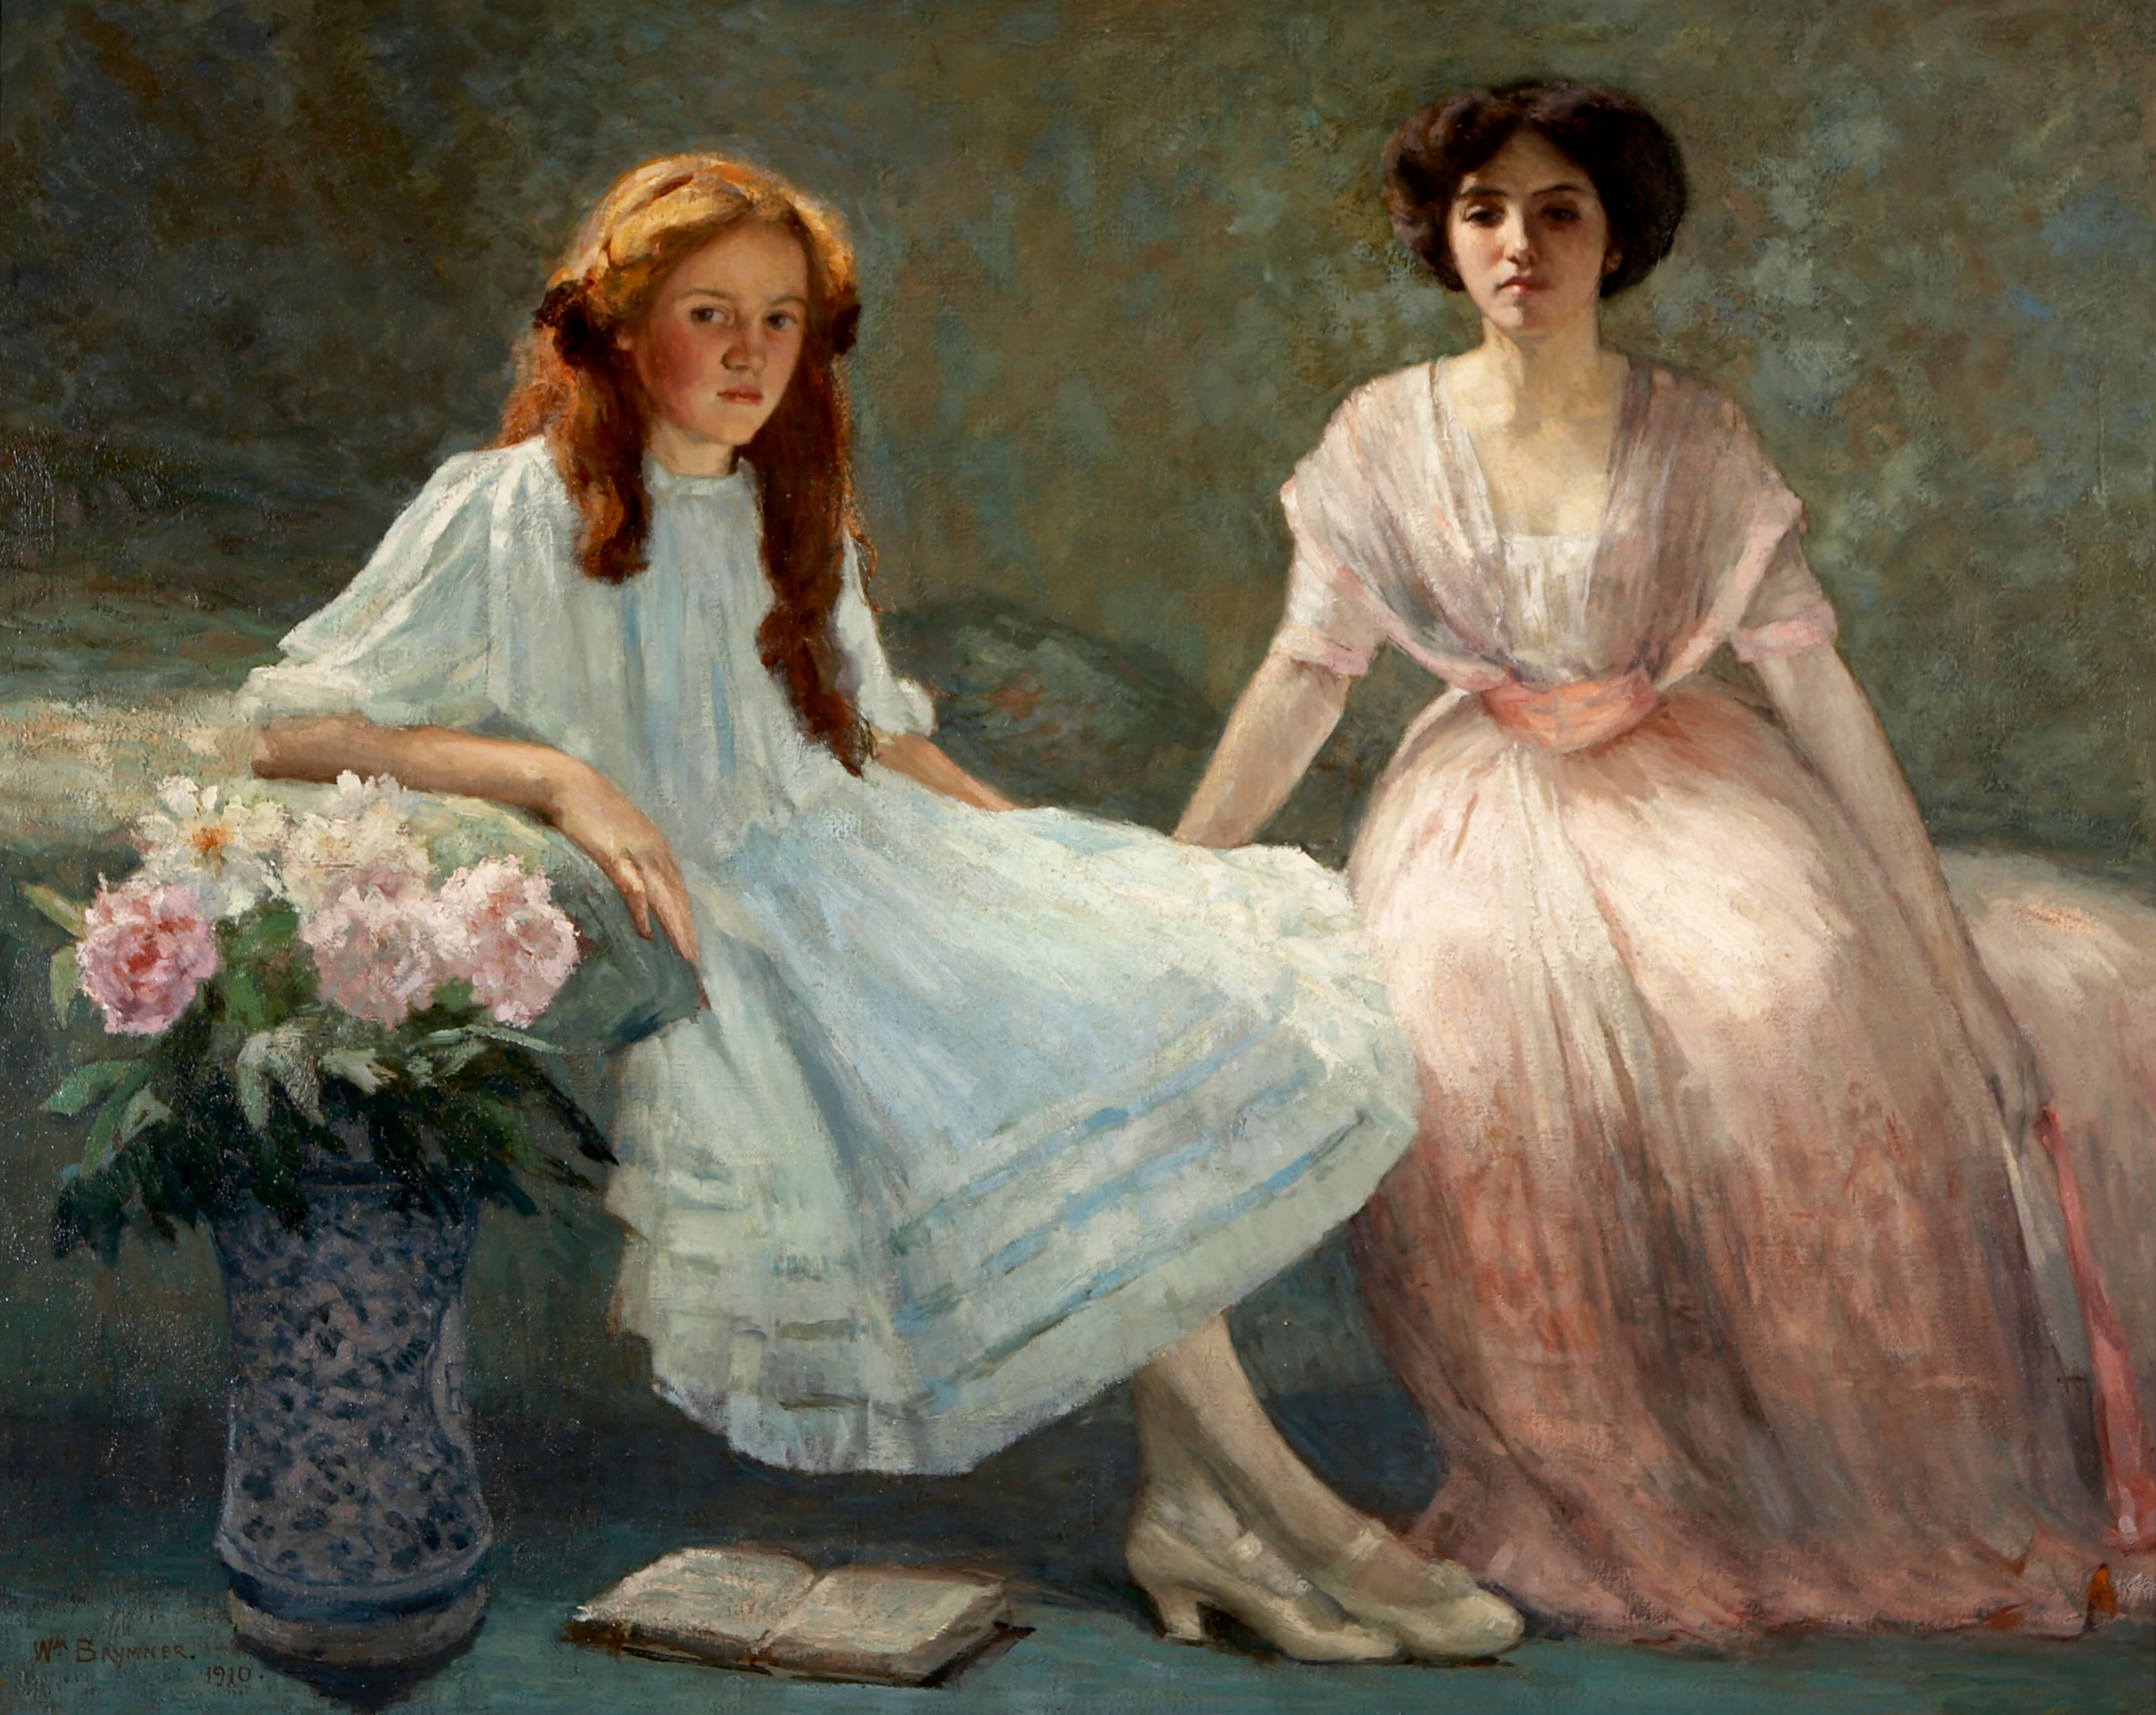 Art Canada Institute, The Vaughan Sisters, 1910, by William Brymner